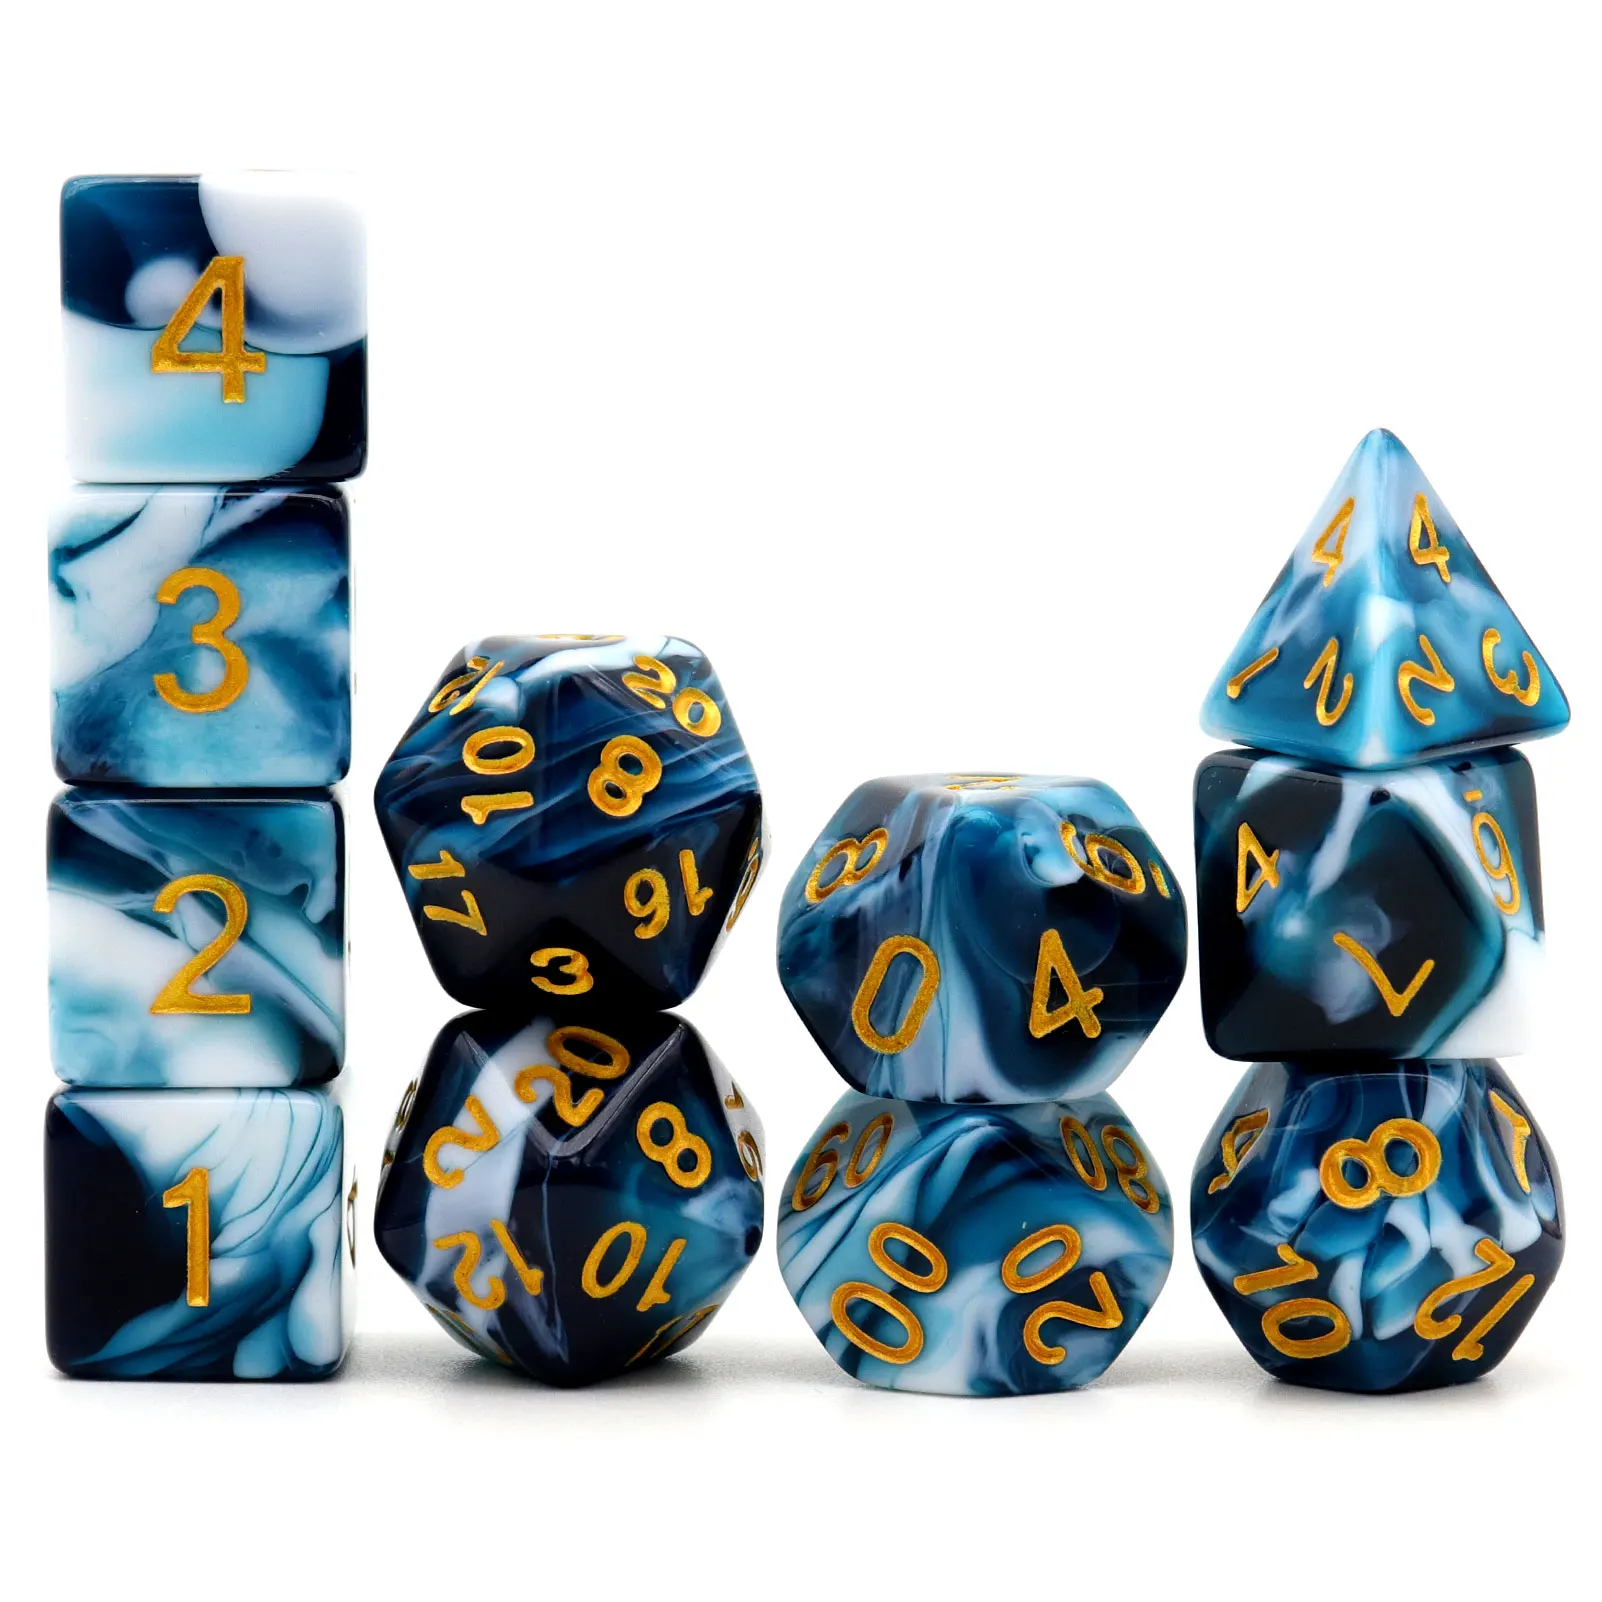 

Haxtec 11PCS DND Dice Set Extra D6 D20 Polyhedral D&D Dice for Roleplaying Dice Games-Teal White Gemini Dice